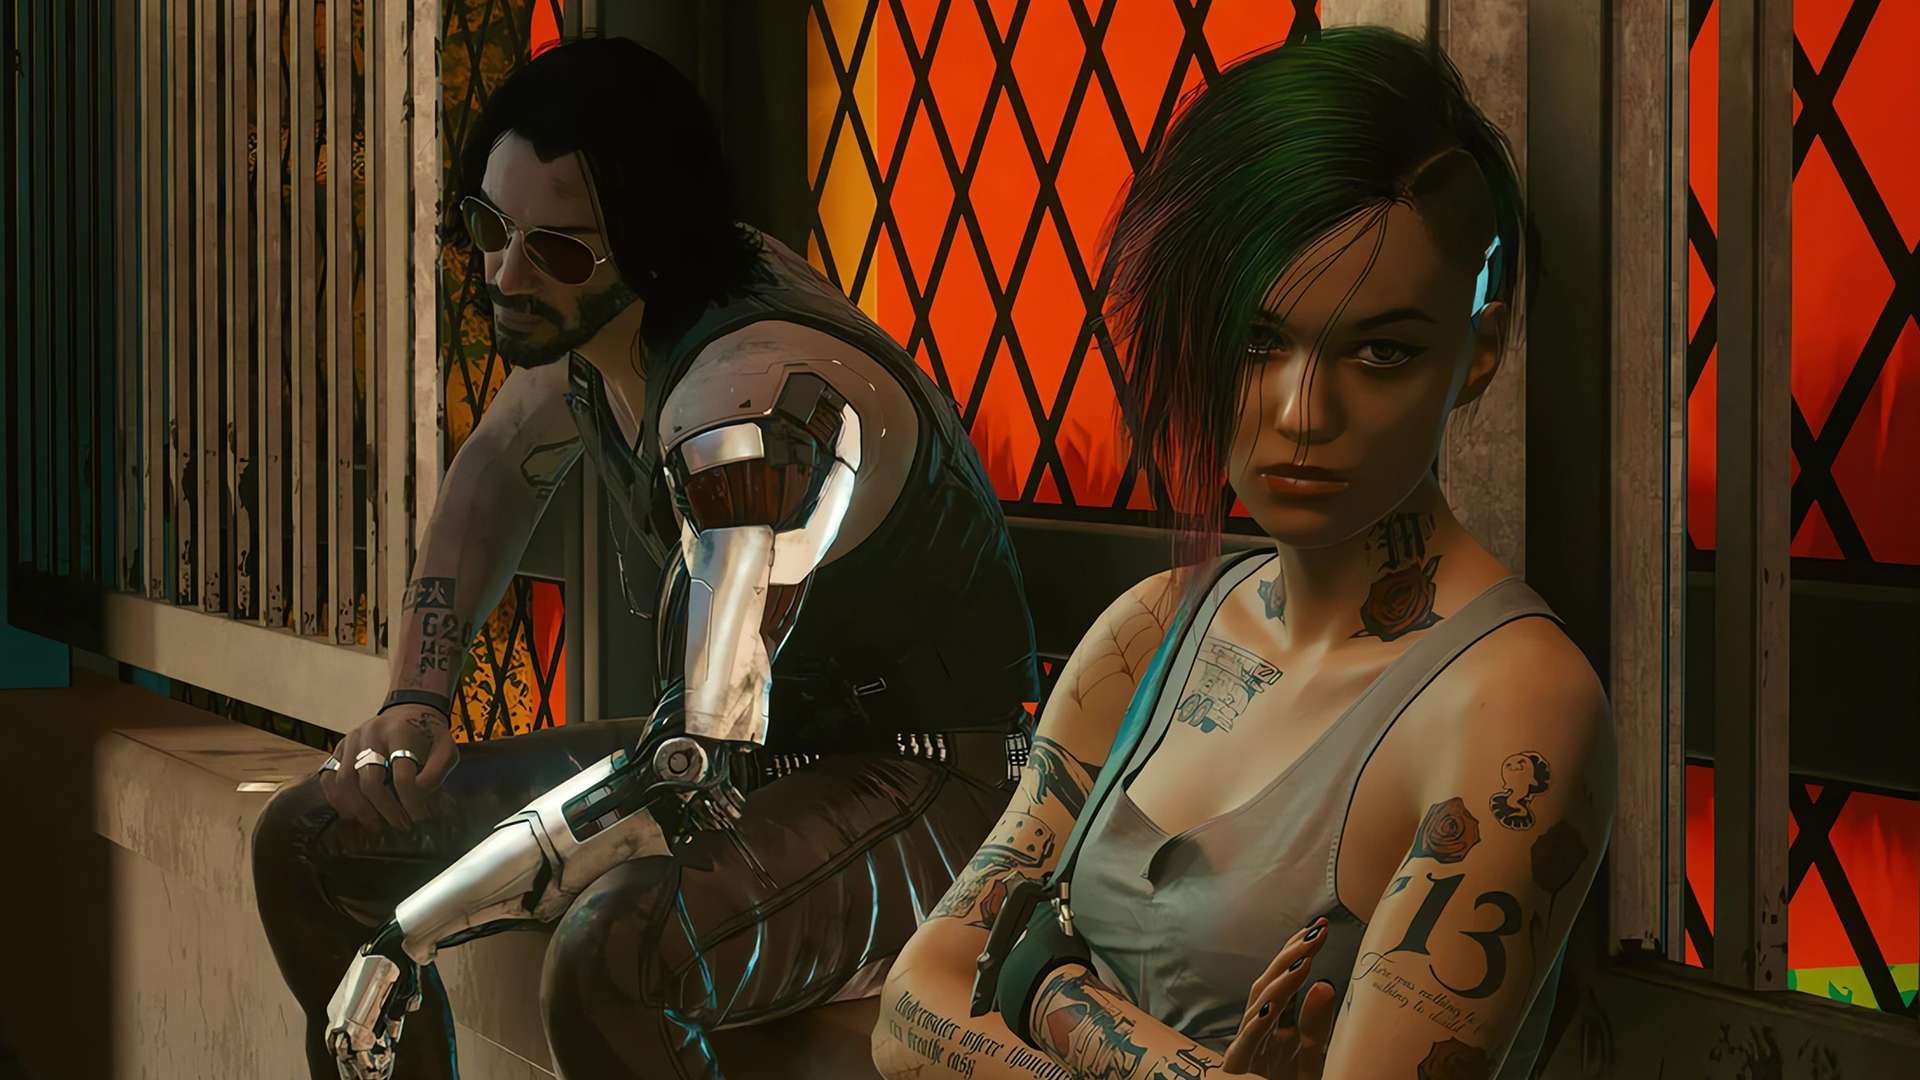 Johnny Silverhand and Judy in Cyberpunk 2077.